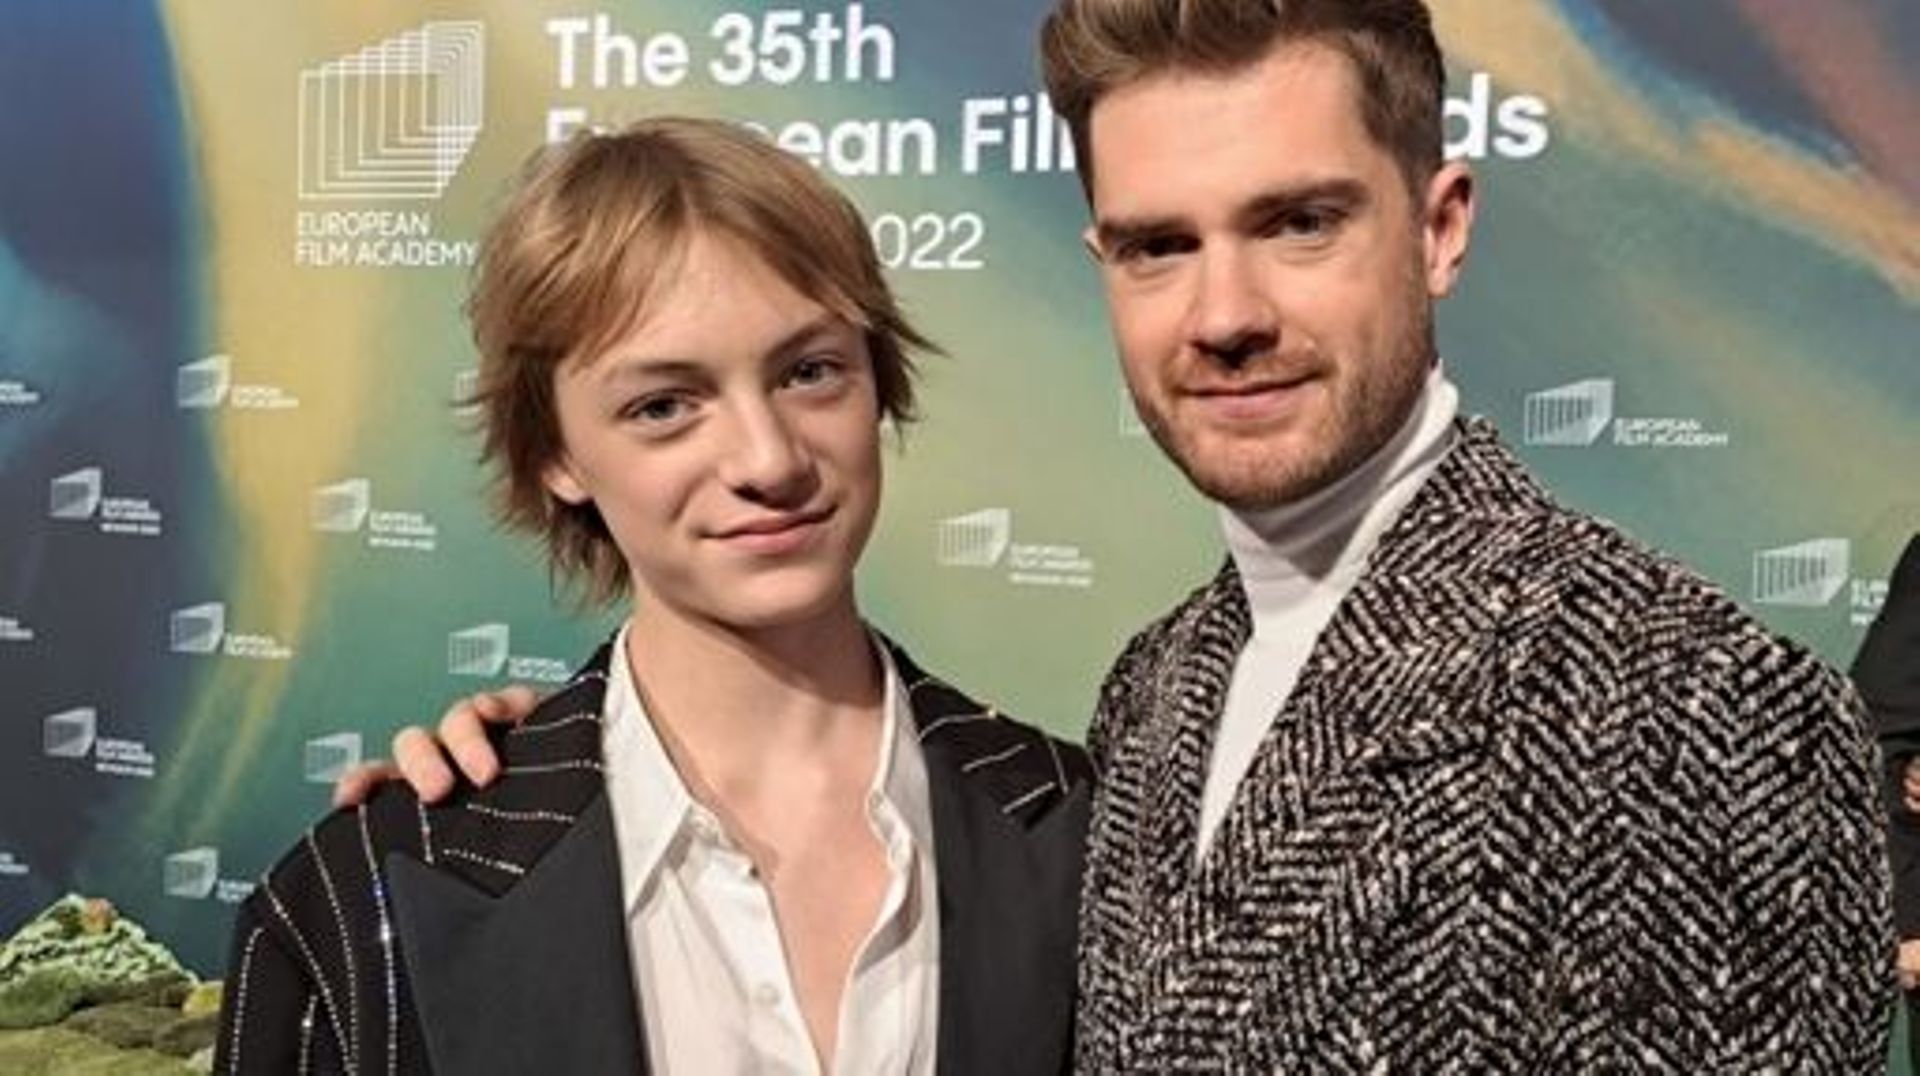 actor Eden Dambrine and director Lukas Dhont of the film Close pictured at the red carpet of the European Film Awards in Reykjavik, Iceland, on Saturday 10 December 2022. BELGA PHOTO AURELIE MOERMAN